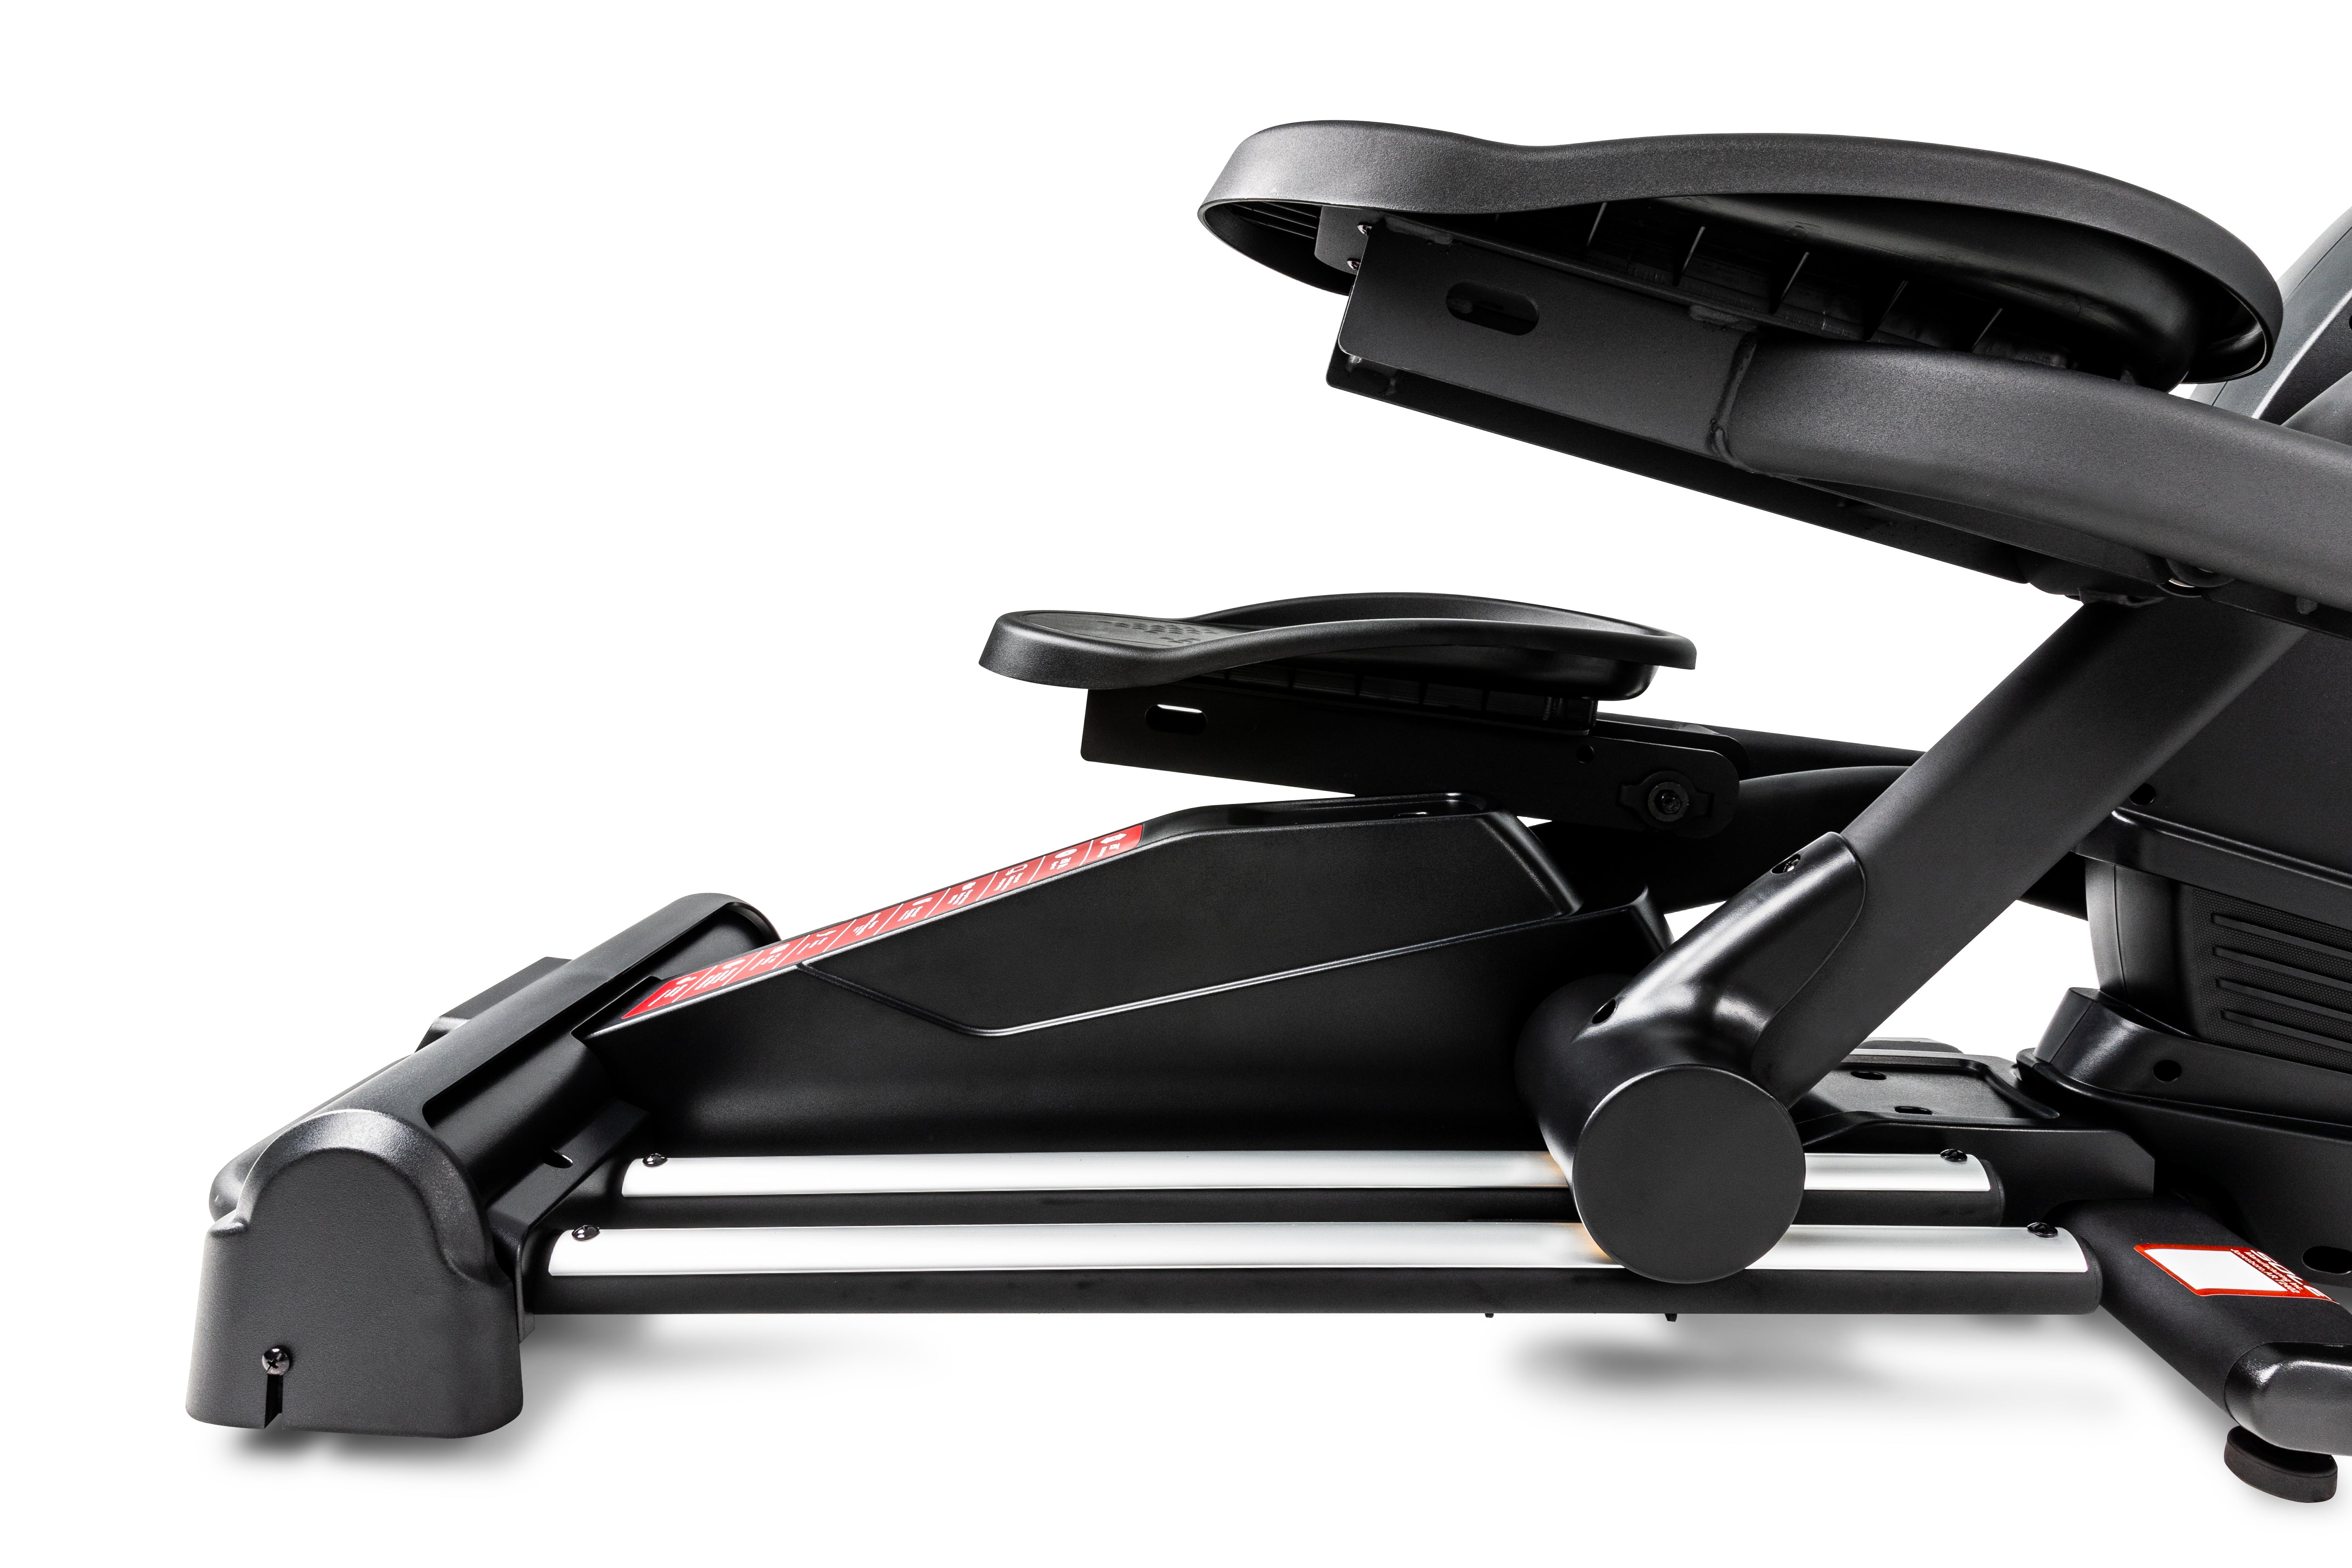 Angled view of the Sole E25 elliptical machine, highlighting its foot pedals, base frame, handlebars, and the black and gray design with red branding details.